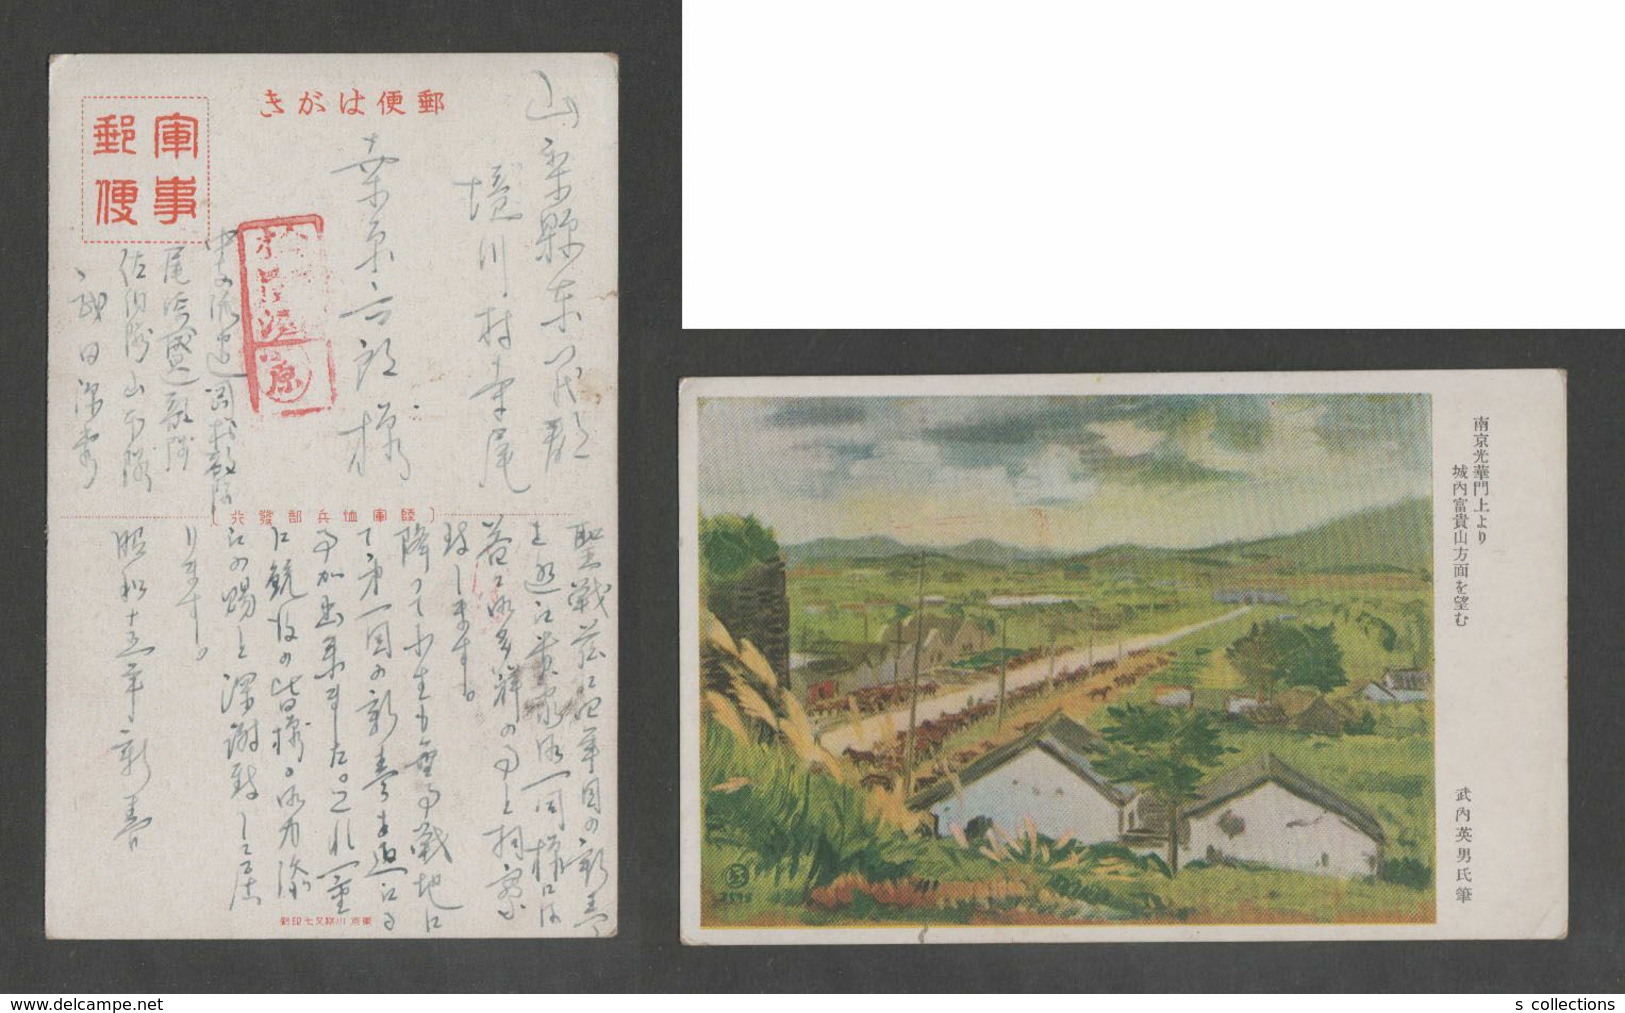 JAPAN WWII Military Nanjing Guanghua Picture Postcard CENTRAL CHINA WW2 MANCHURIA CHINE MANDCHOUKOUO JAPON GIAPPONE - 1943-45 Shanghai & Nanjing